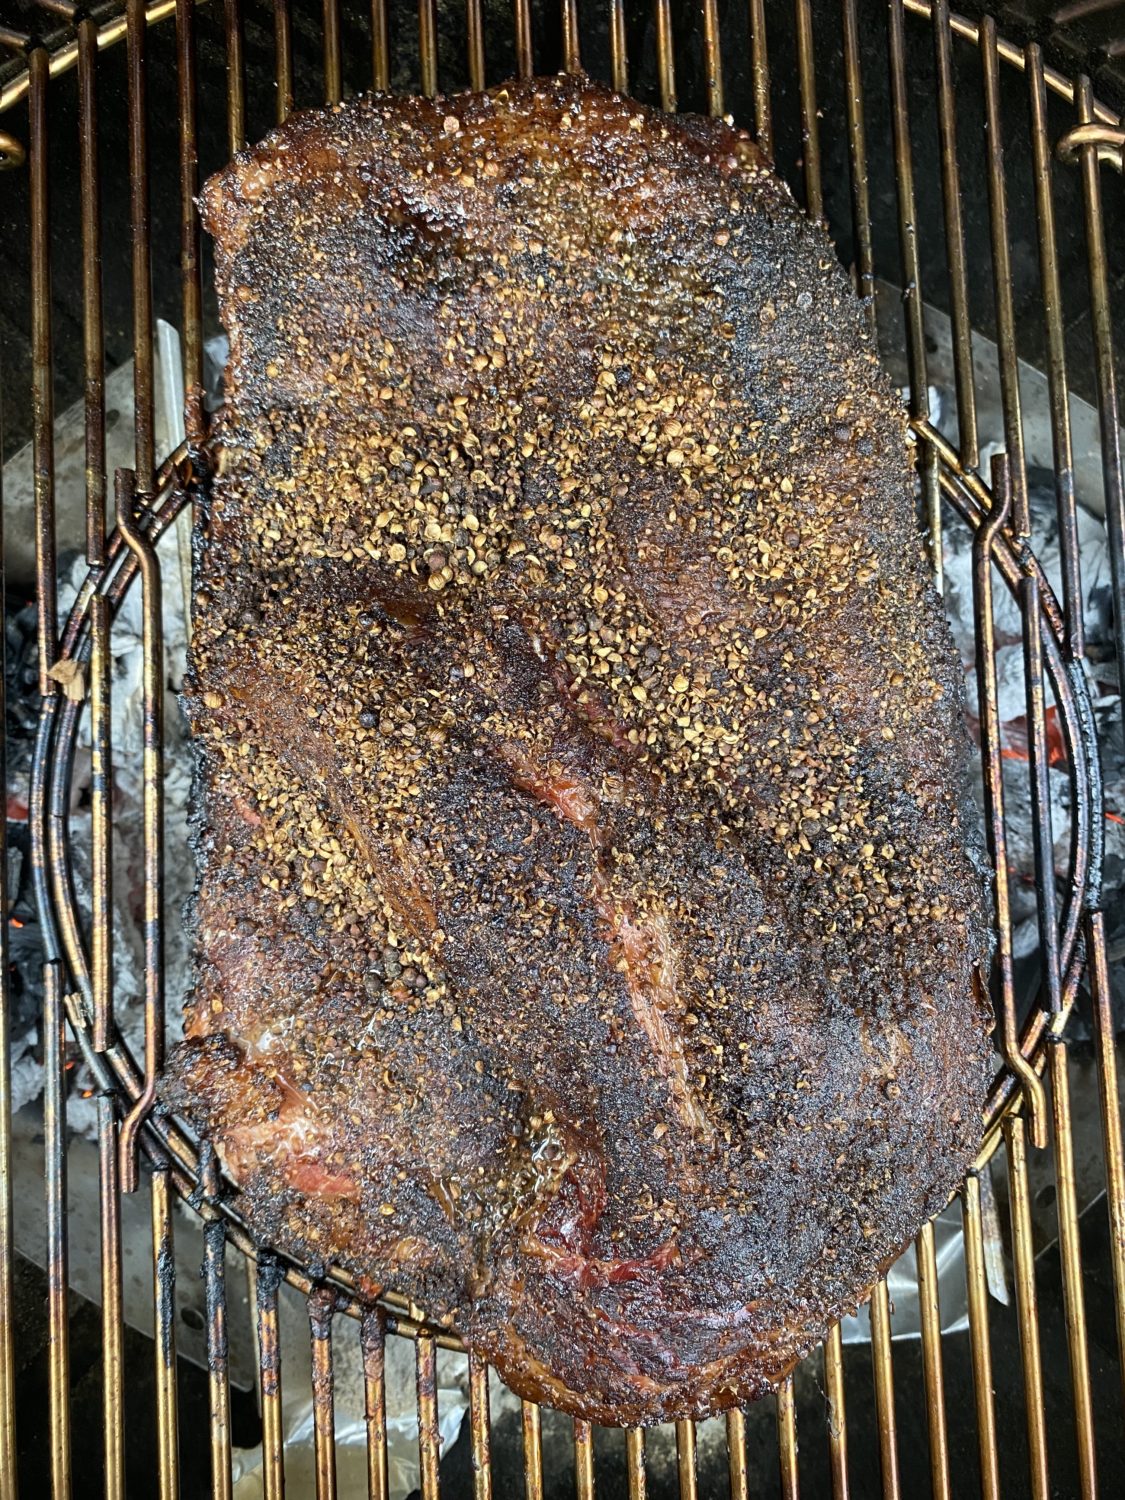 brisket on the grill